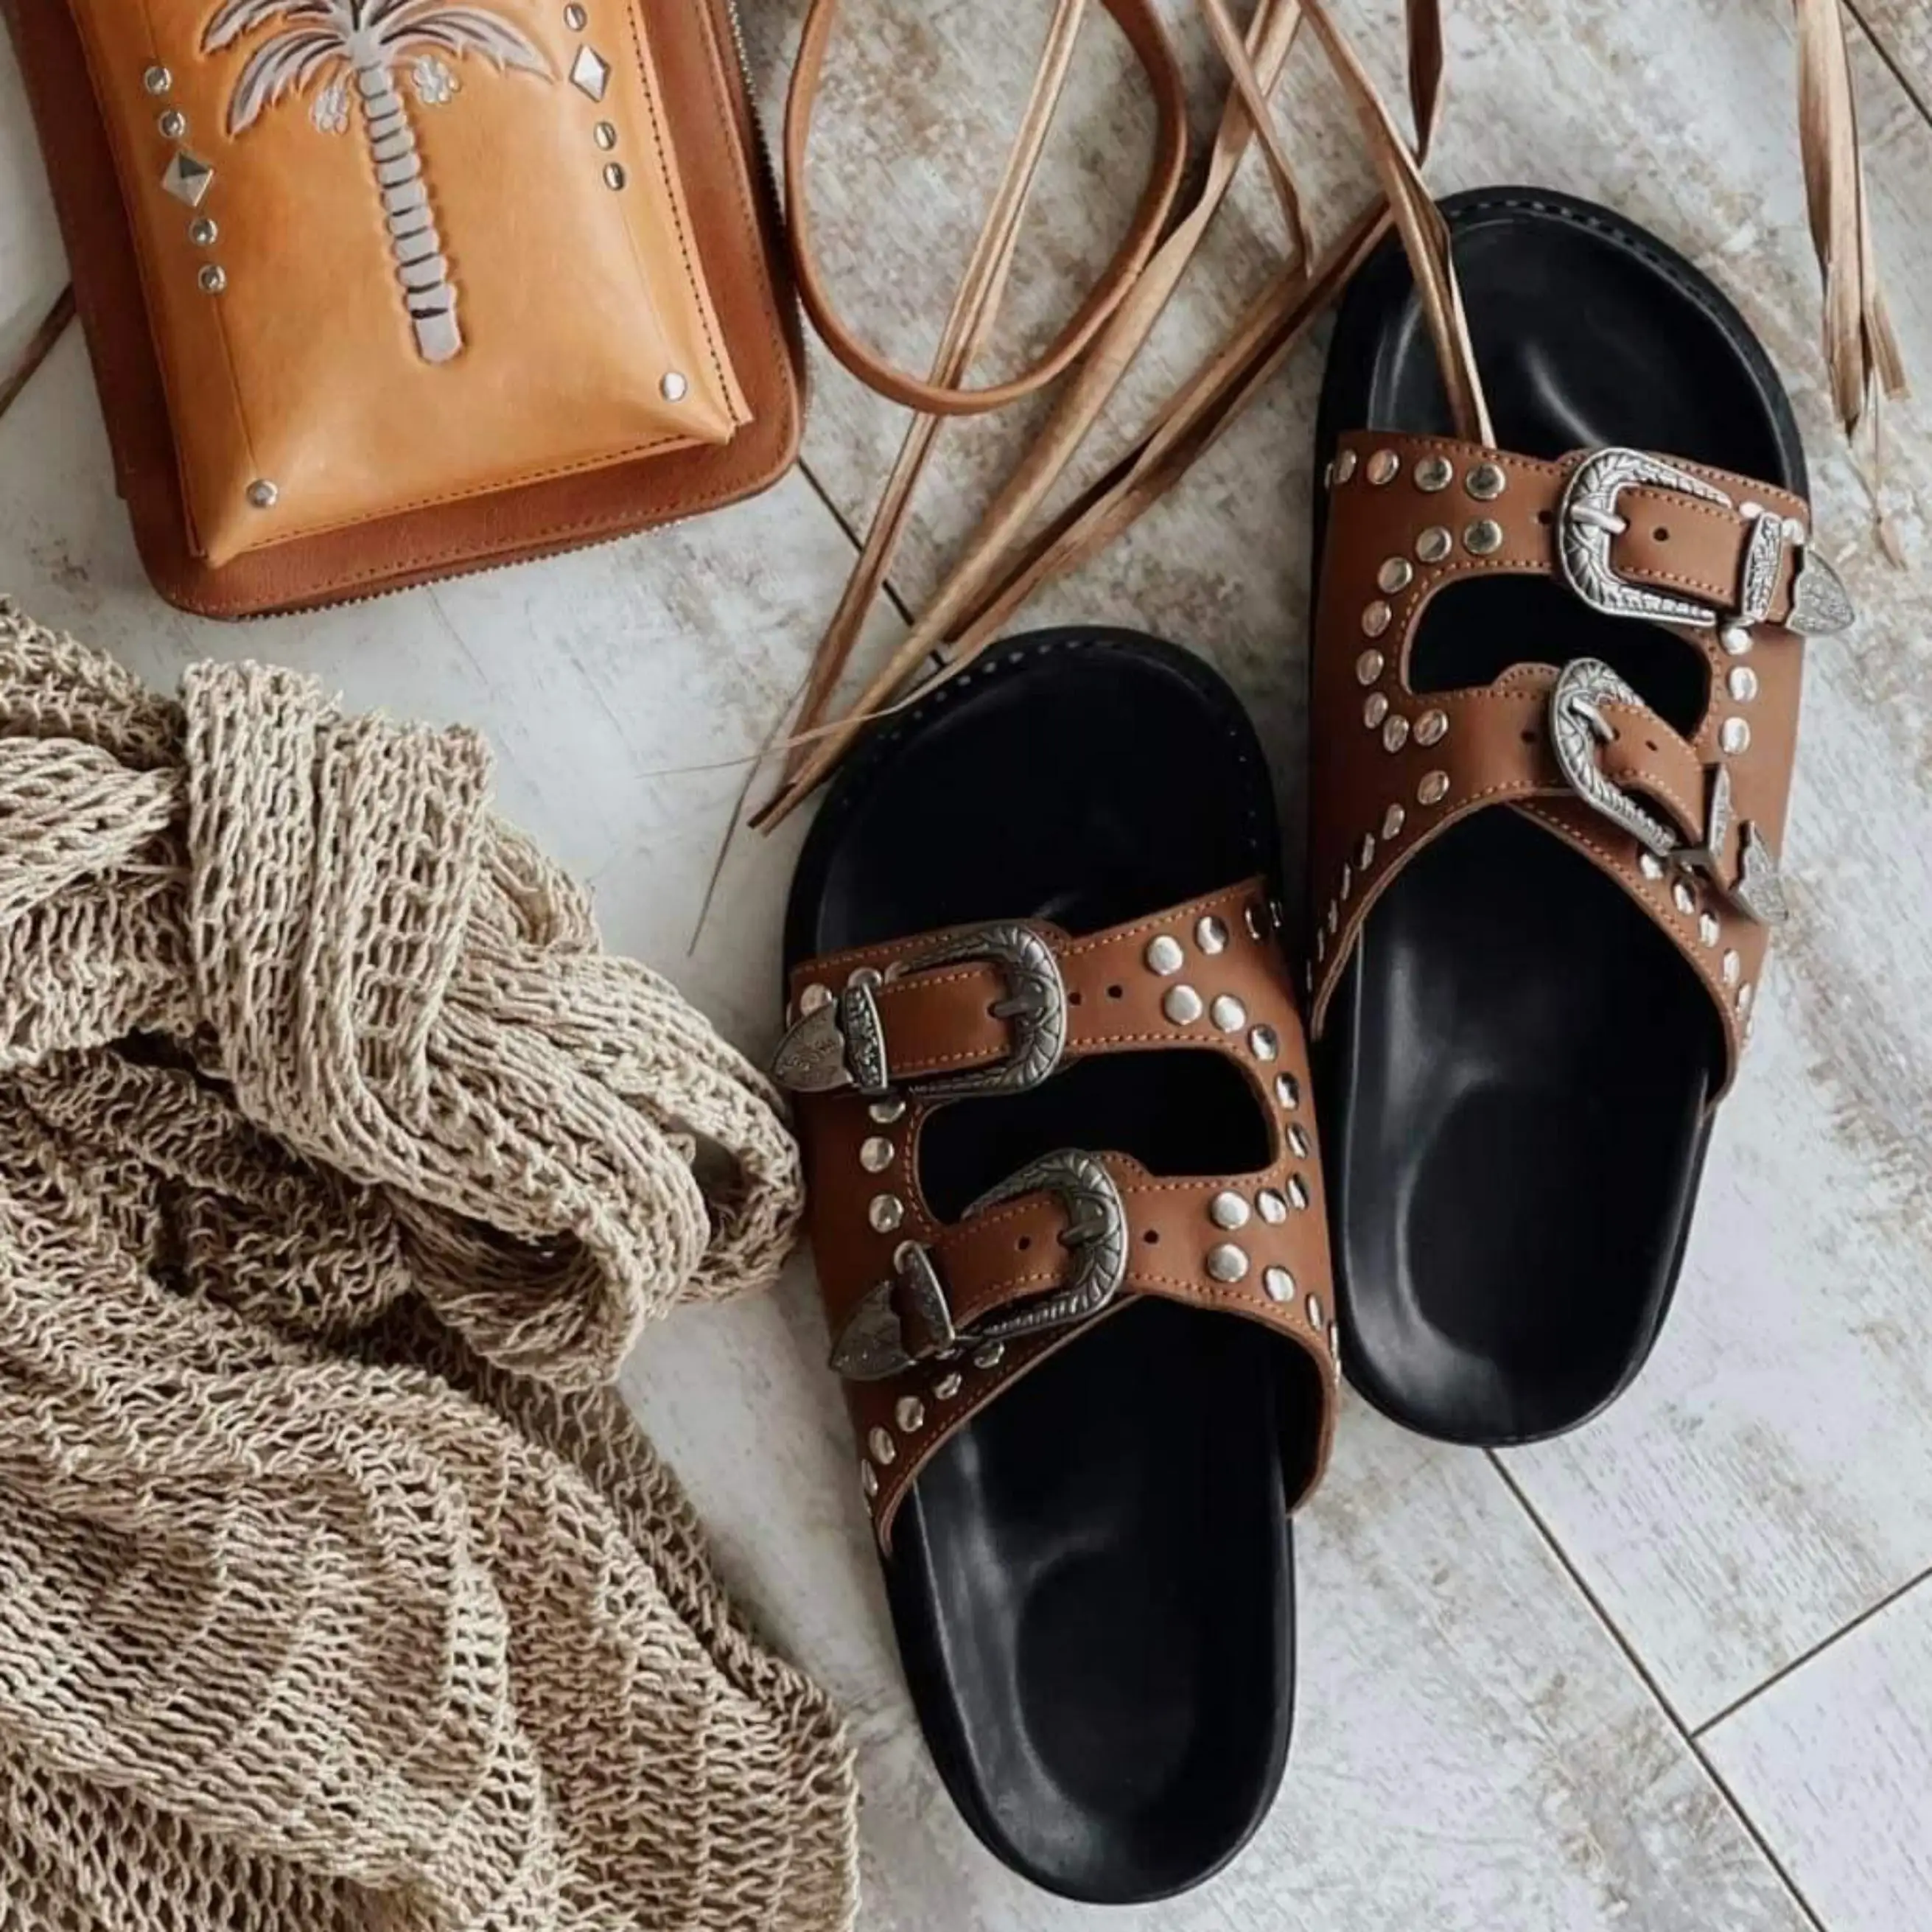 The Outlaw Sandals - Tan + Black